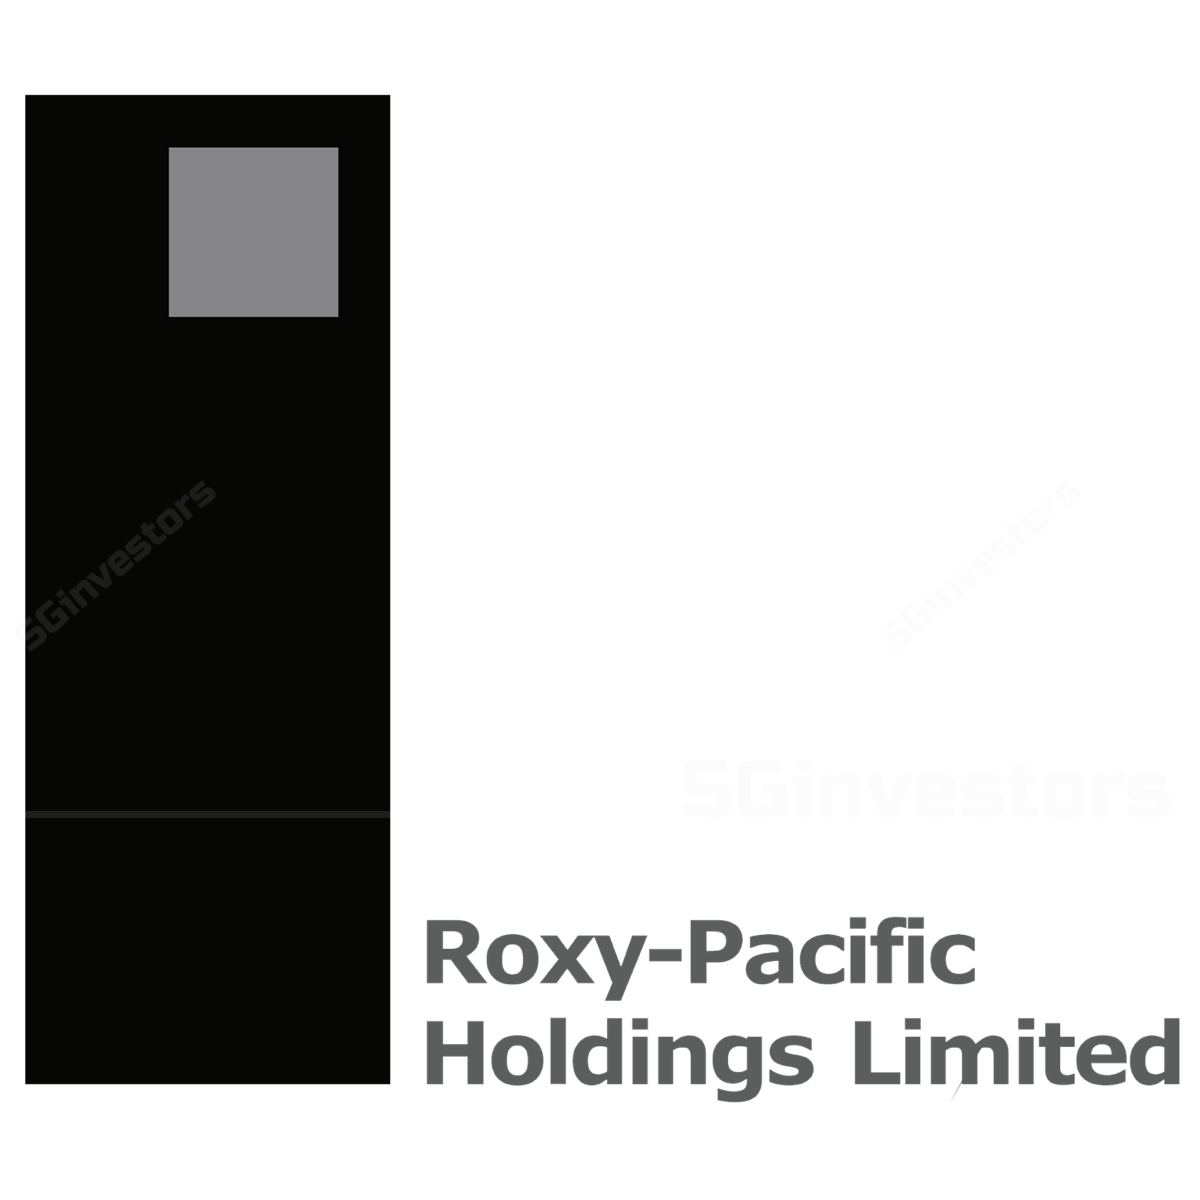 Roxy-Pacific Holdings Limited